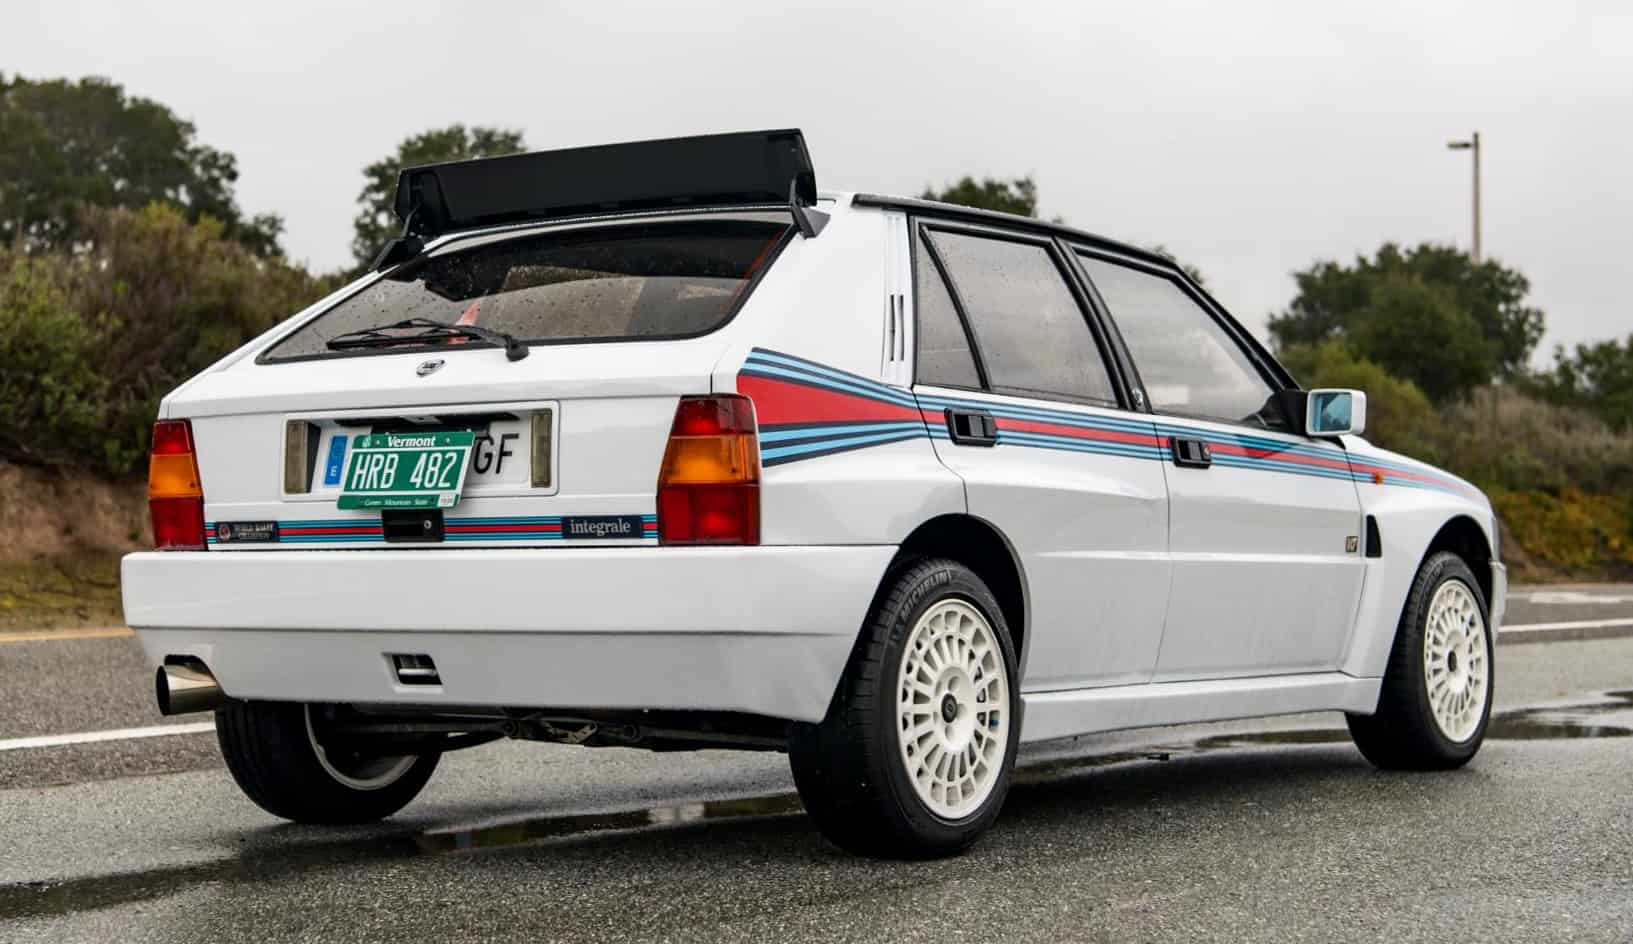 Lancia Delta Integrale, Pick of the Day: 25-year rule allows street-legal rally car’s importation, ClassicCars.com Journal